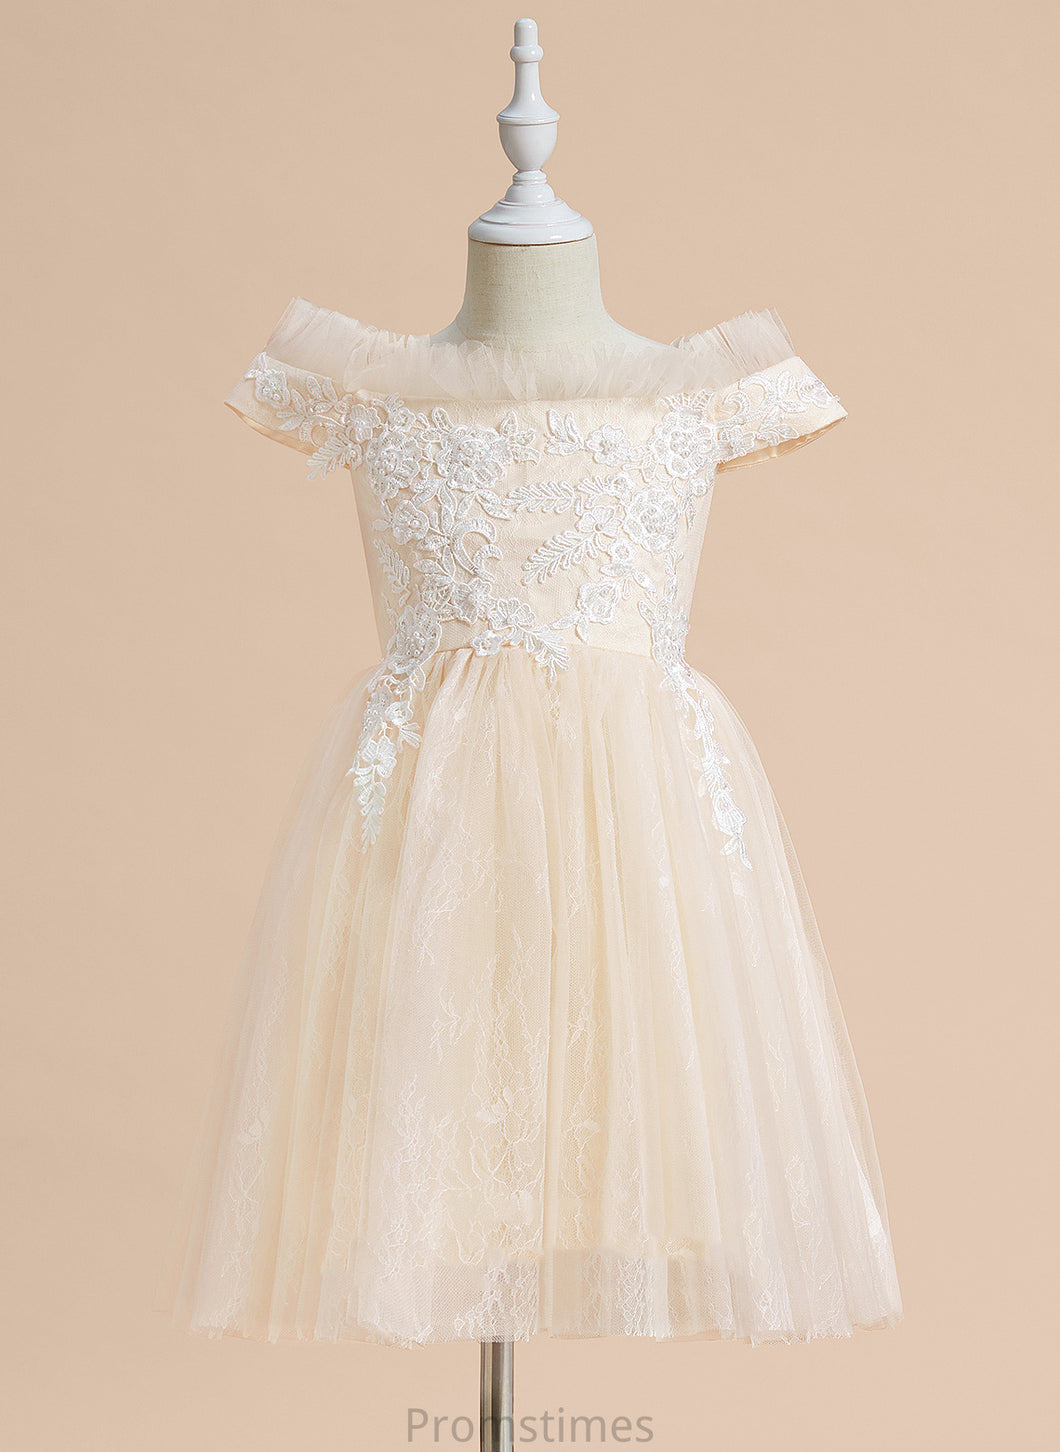 - A-Line Flower Girl Knee-length Lace Flower Girl Dresses Off-the-Shoulder Sleeveless Dress Tulle With Kendal